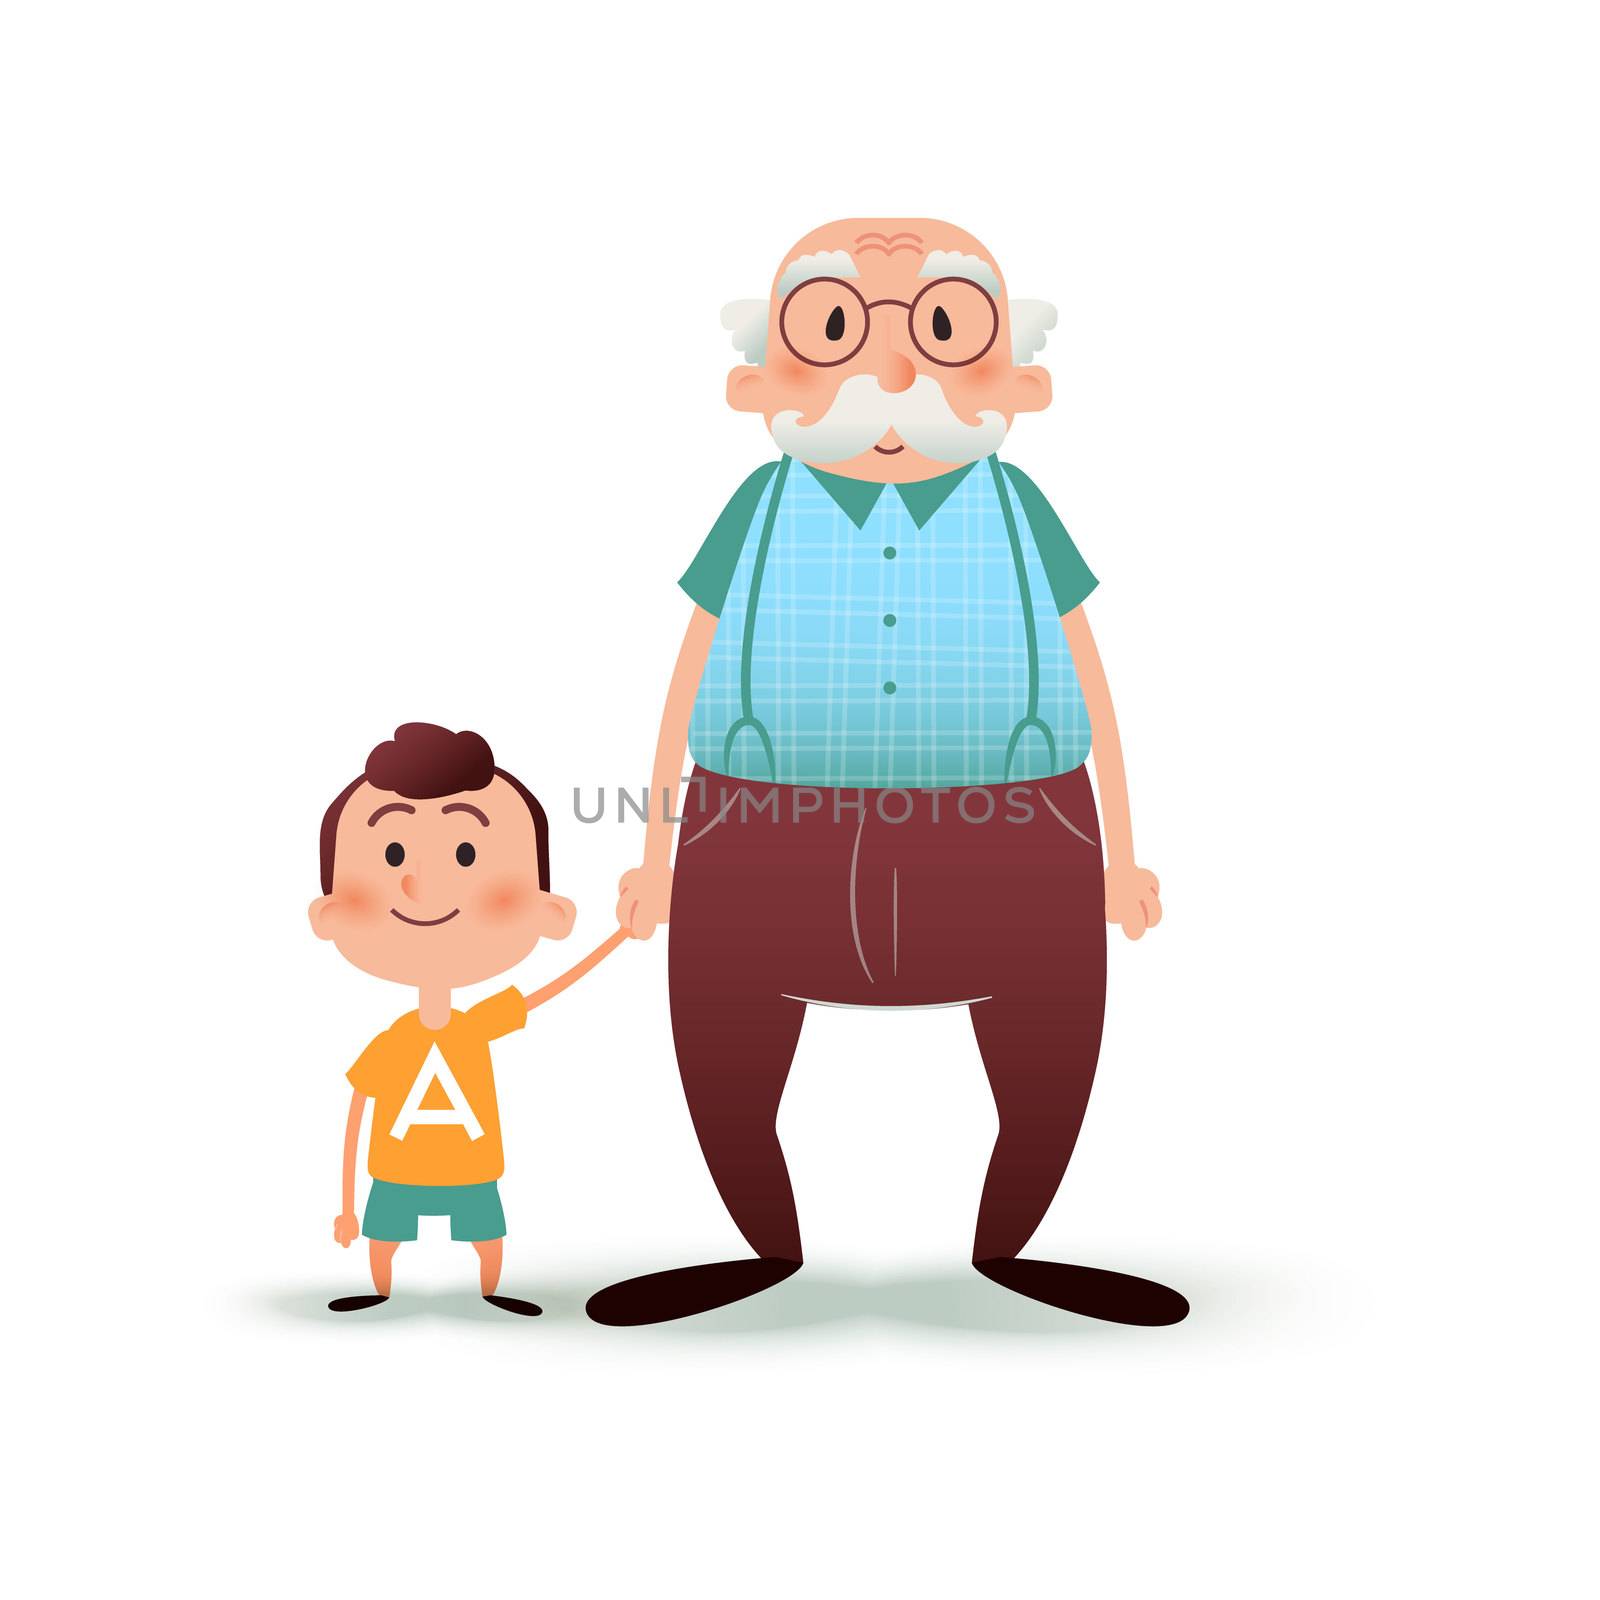 Grandfather and grandson holding hands. Little boy and old man cartoon illustration. Happy family concept